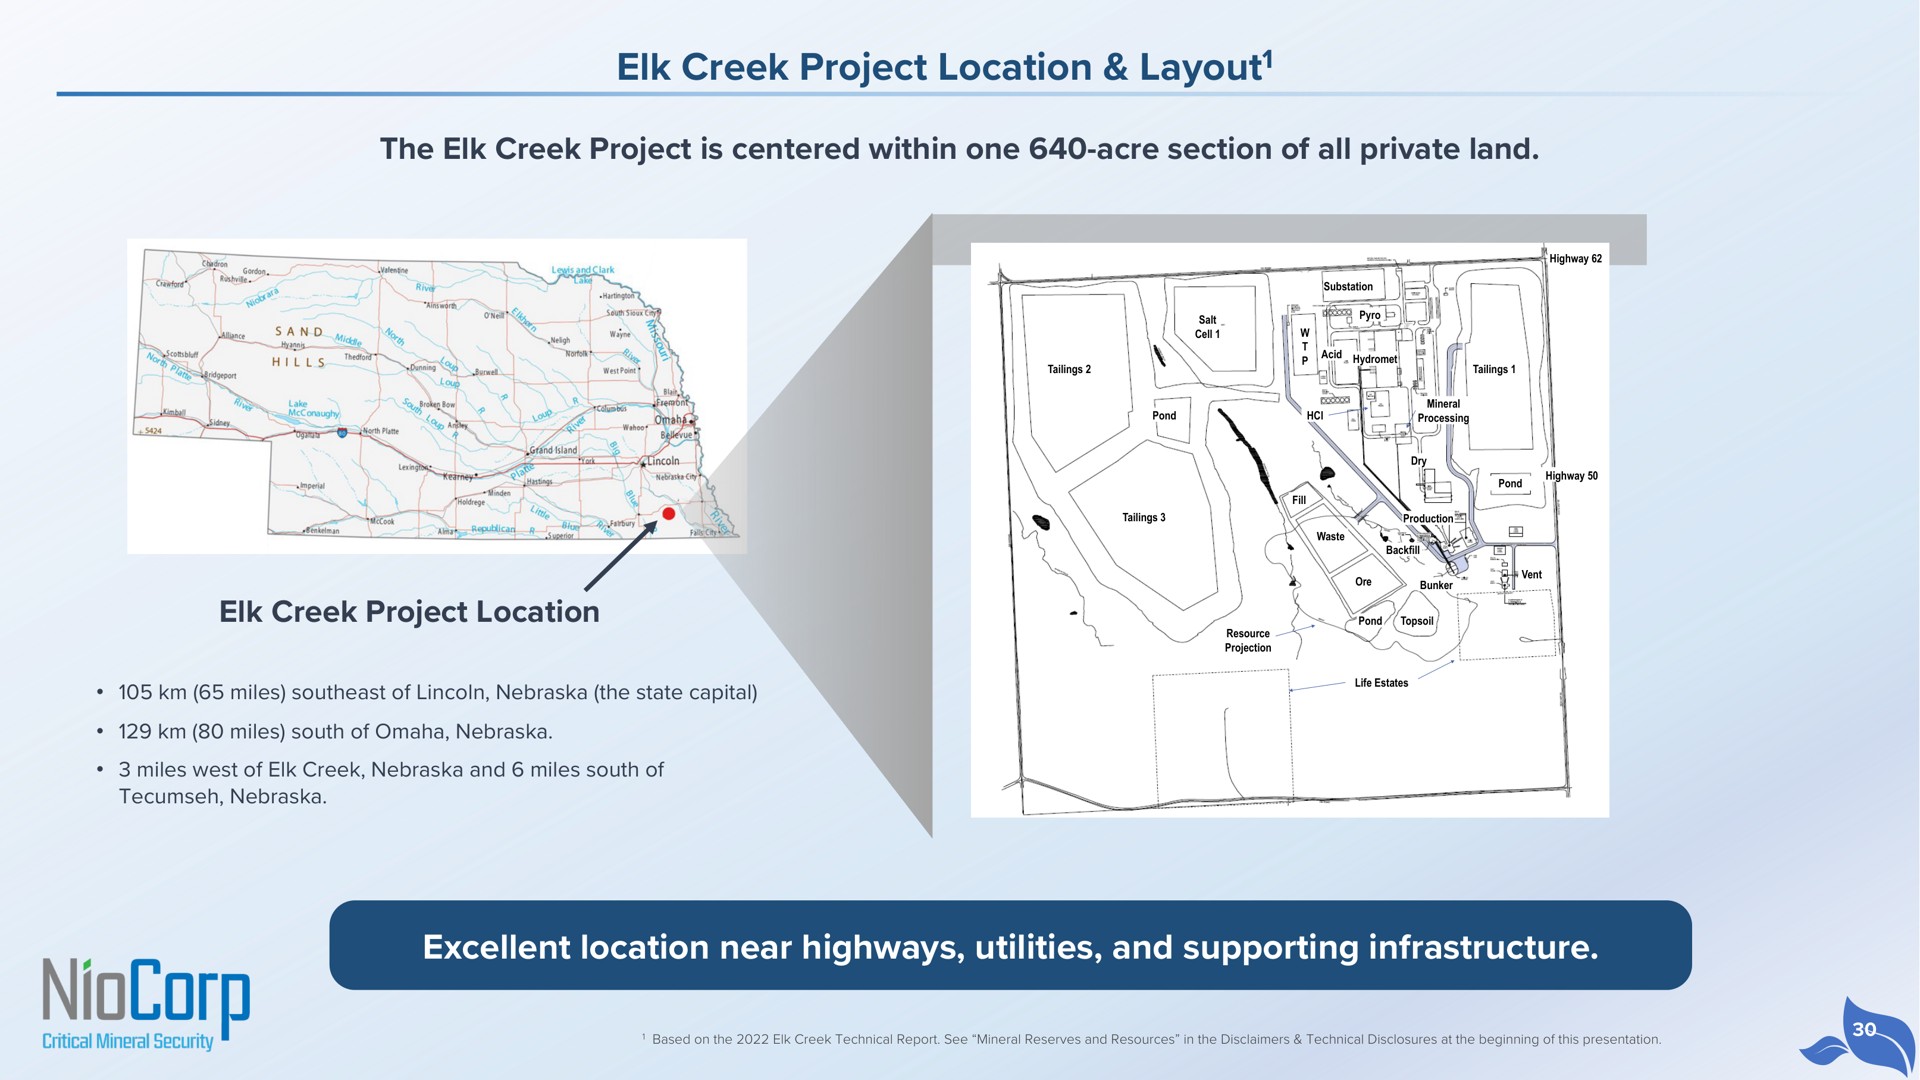 elk creek project location layout the elk creek project is centered within one acre section of all private land elk creek project location excellent location near highways utilities and supporting infrastructure layout sons | NioCorp